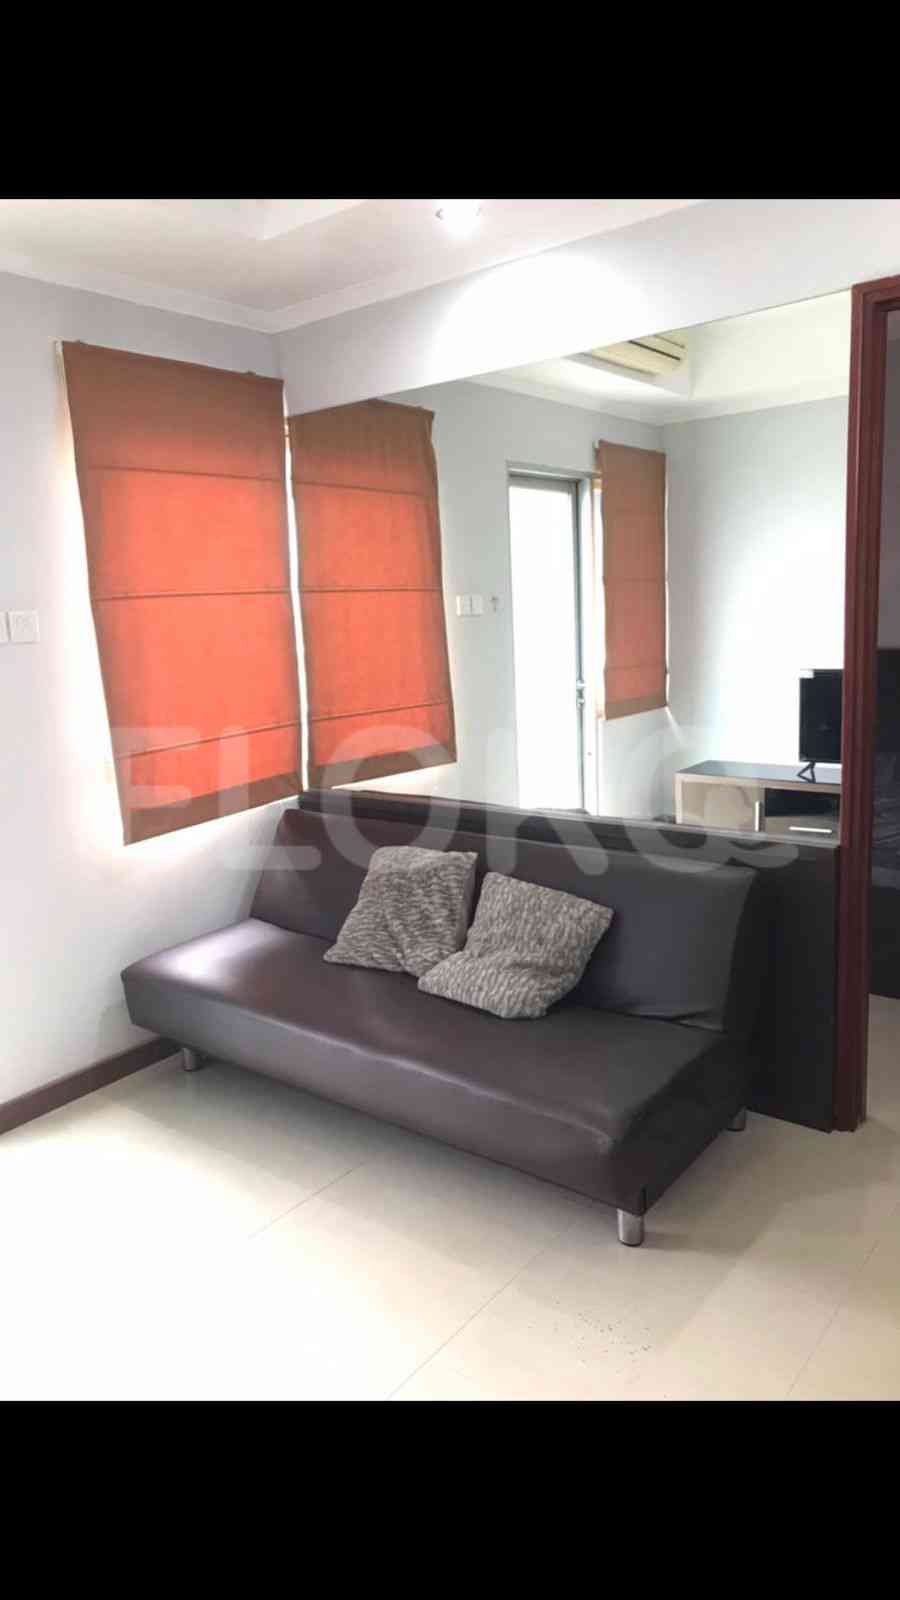 1 Bedroom on 15th Floor for Rent in Sudirman Park Apartment - ftab19 3